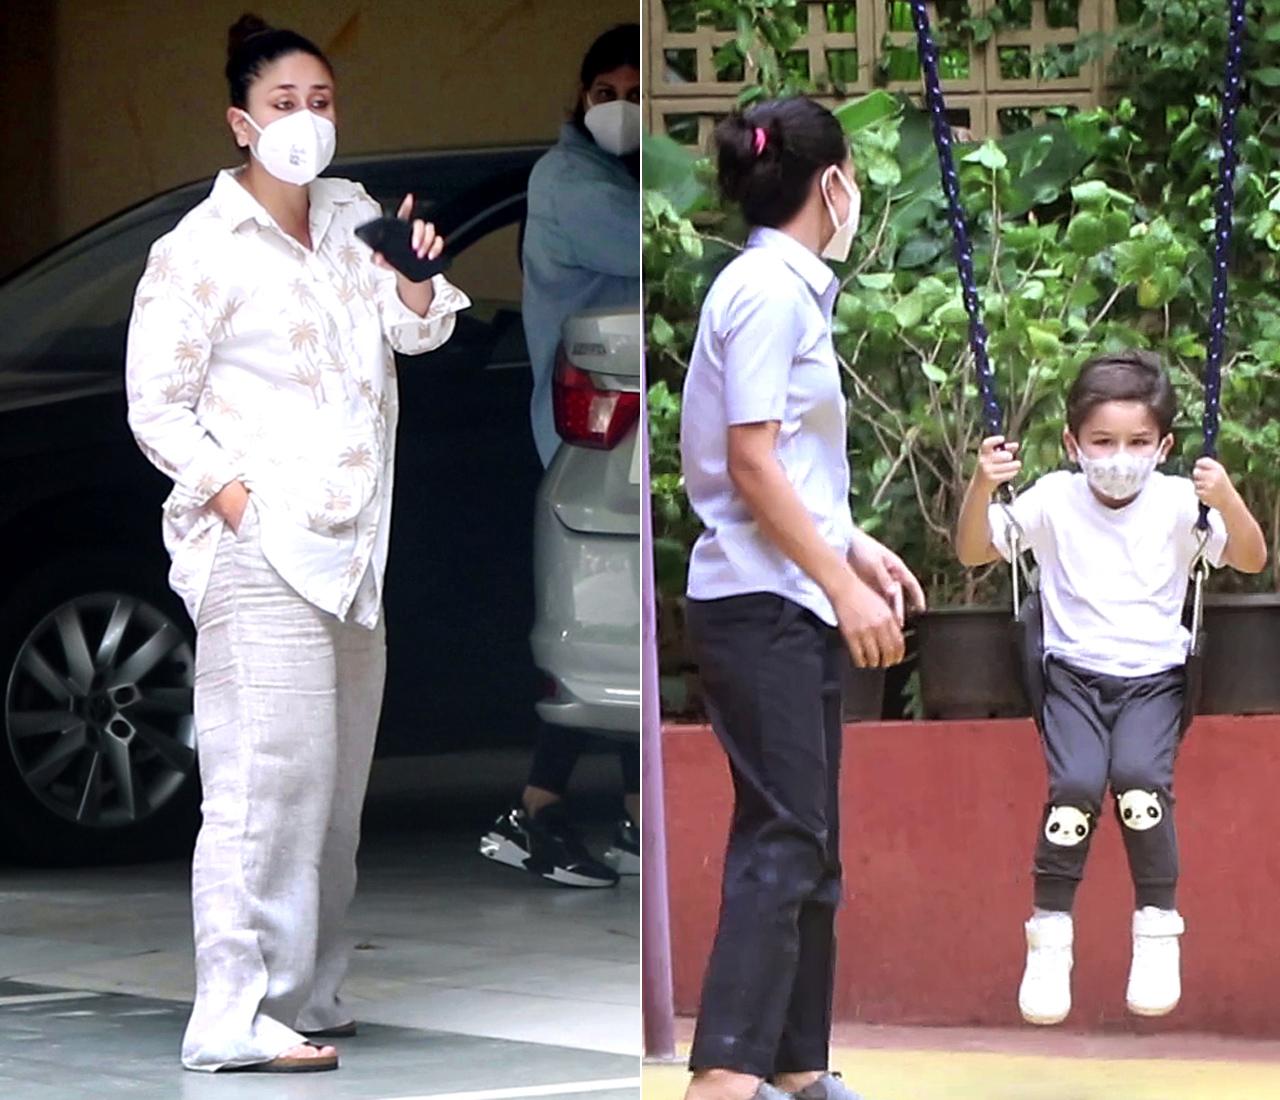 Kareena Kapoor Khan was spotted with her son, Taimur Ali Khan as the actress visited her friend's place in Bandra, Mumbai. Doting momma, Bebo was seen instructing her little one to make sure he is careful while playing on the swing.